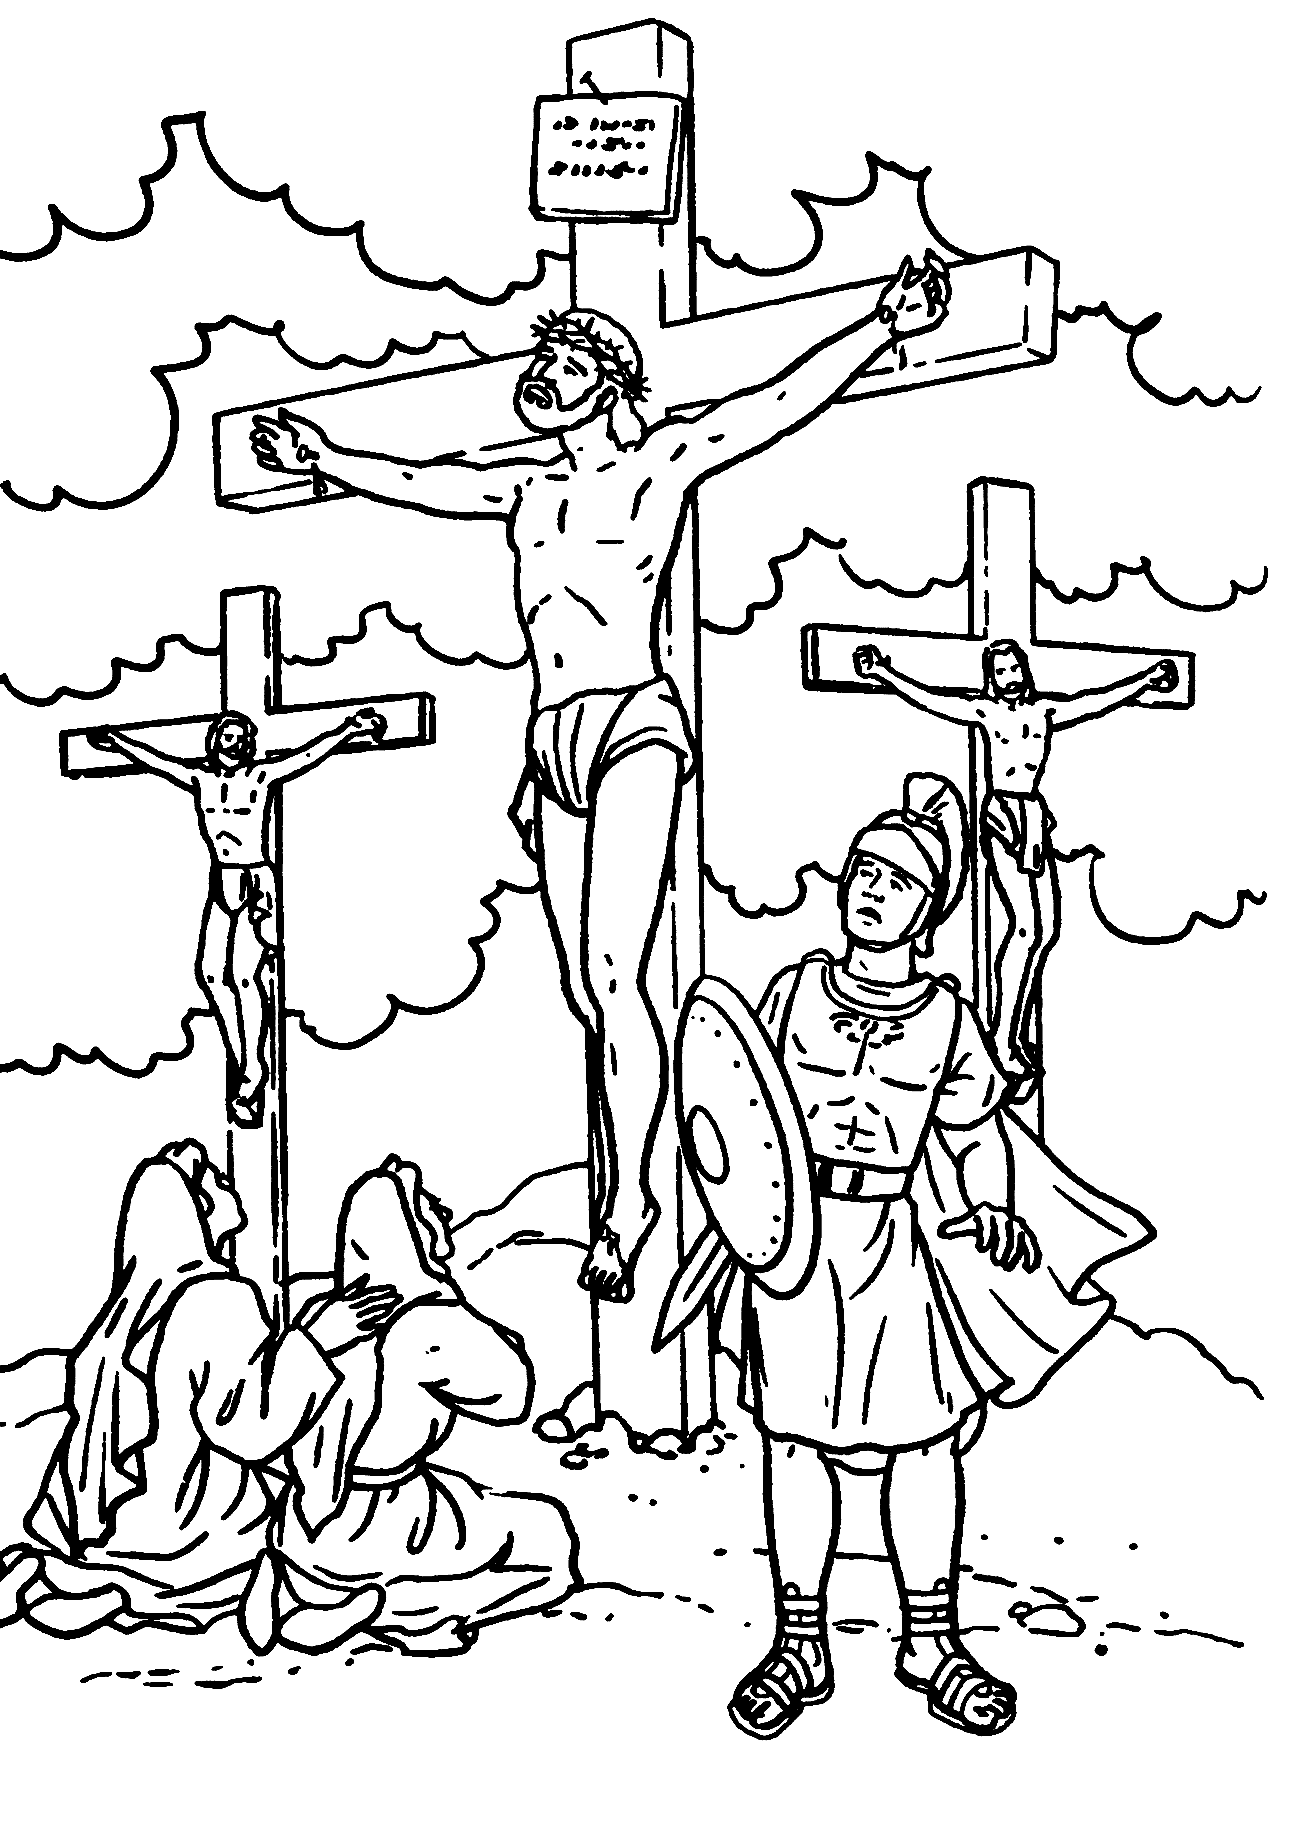 Good friday coloring pages printable for free download